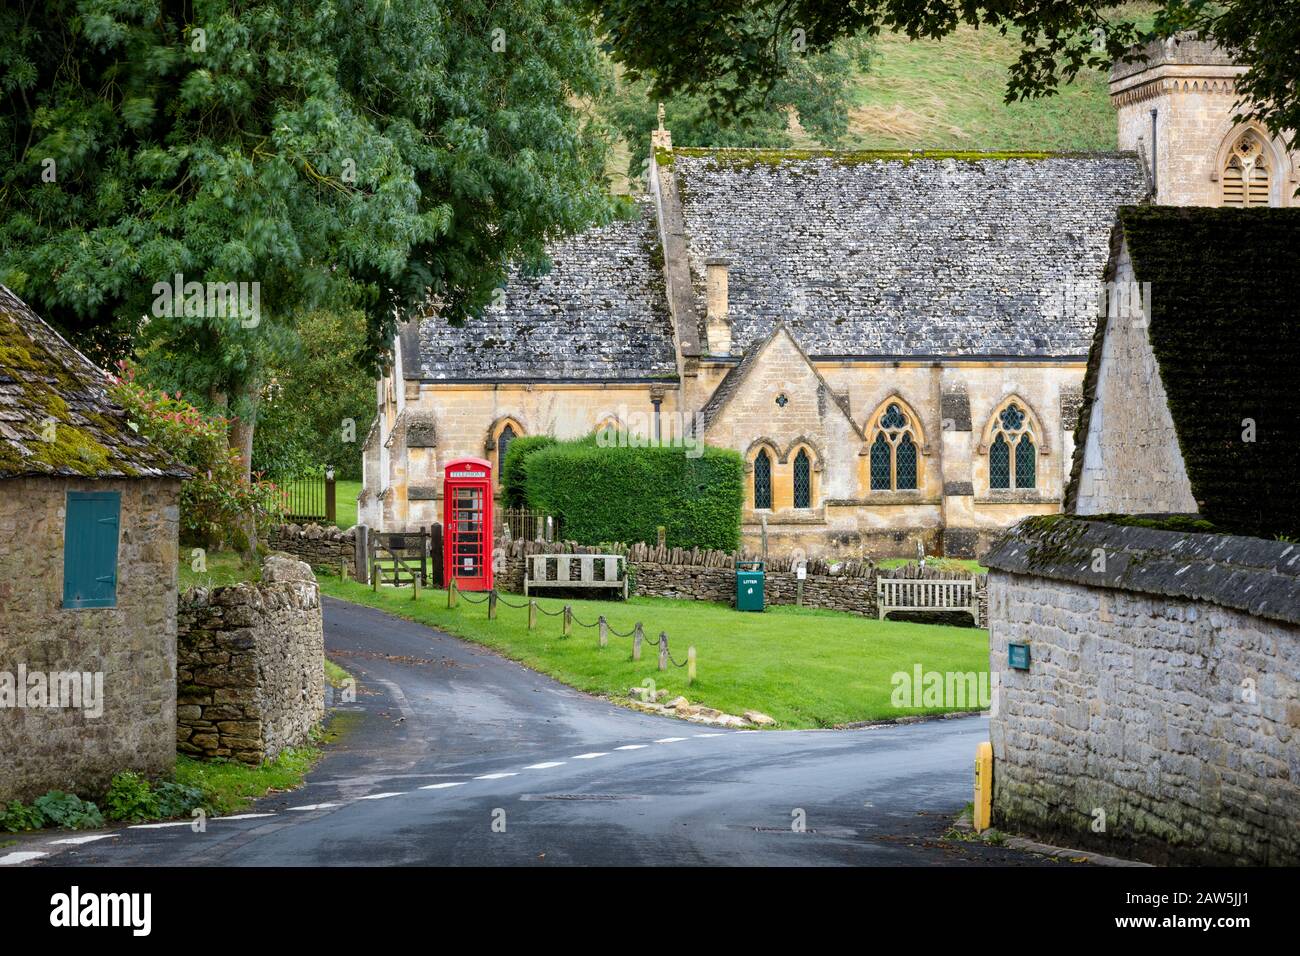 Saint Barnabas Church in the Cotswolds Village of Snowshill, Gloucestershire, England, Großbritannien Stockfoto